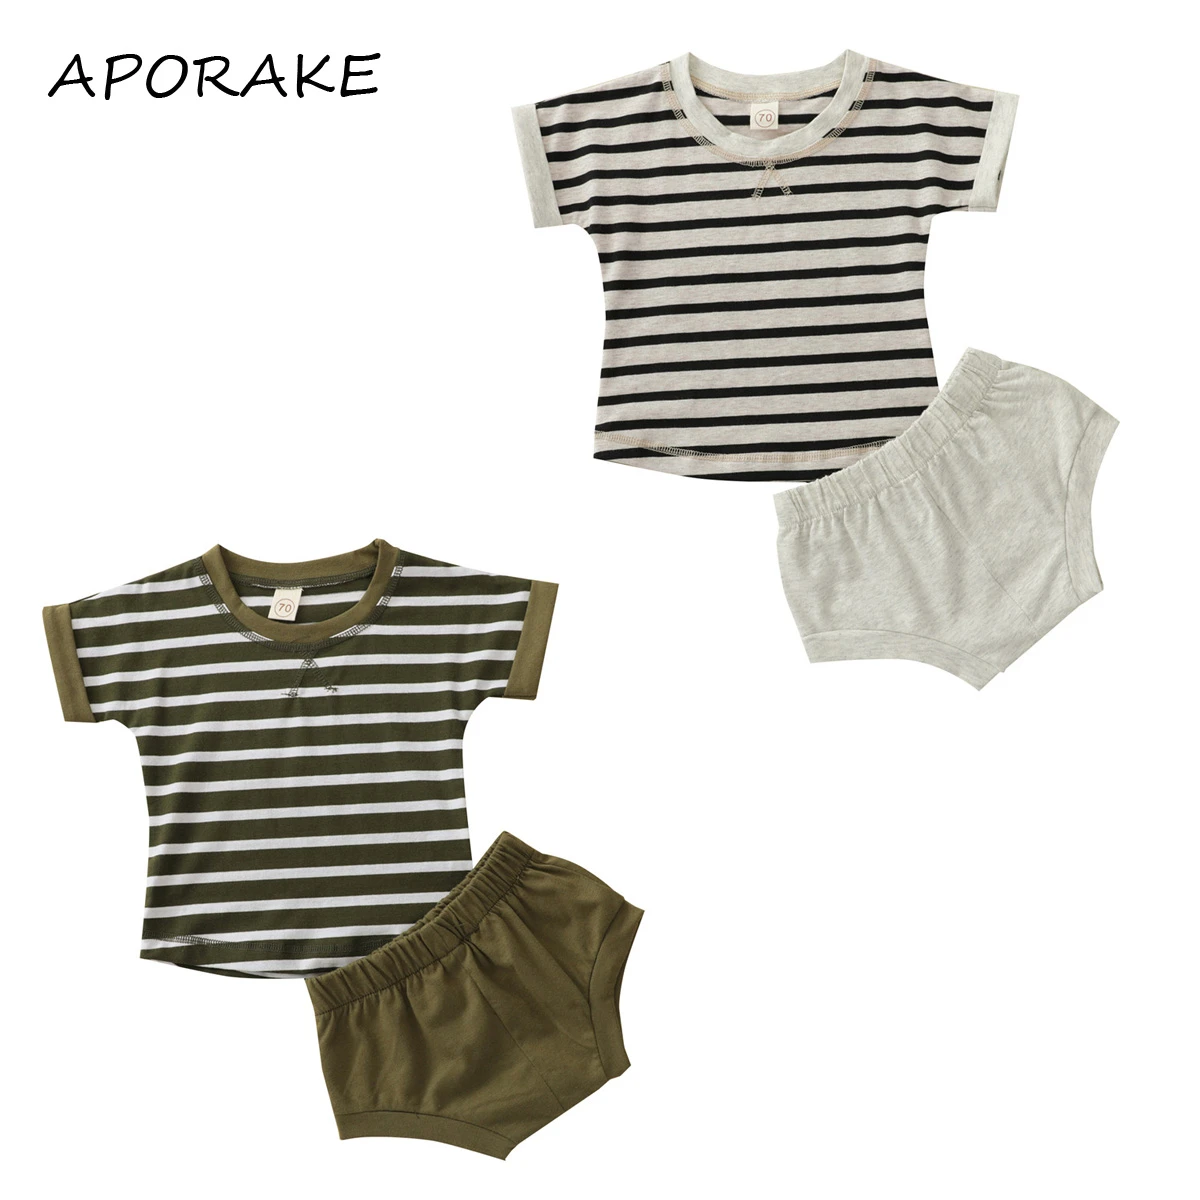 2021 0-24M Newborn Baby Girl Clothes Set Tracksuit Striped Print Short Sleeve T-shirt+Triangle Shorts Summer Cotton 2pcs Outfits vintage Baby Clothing Set